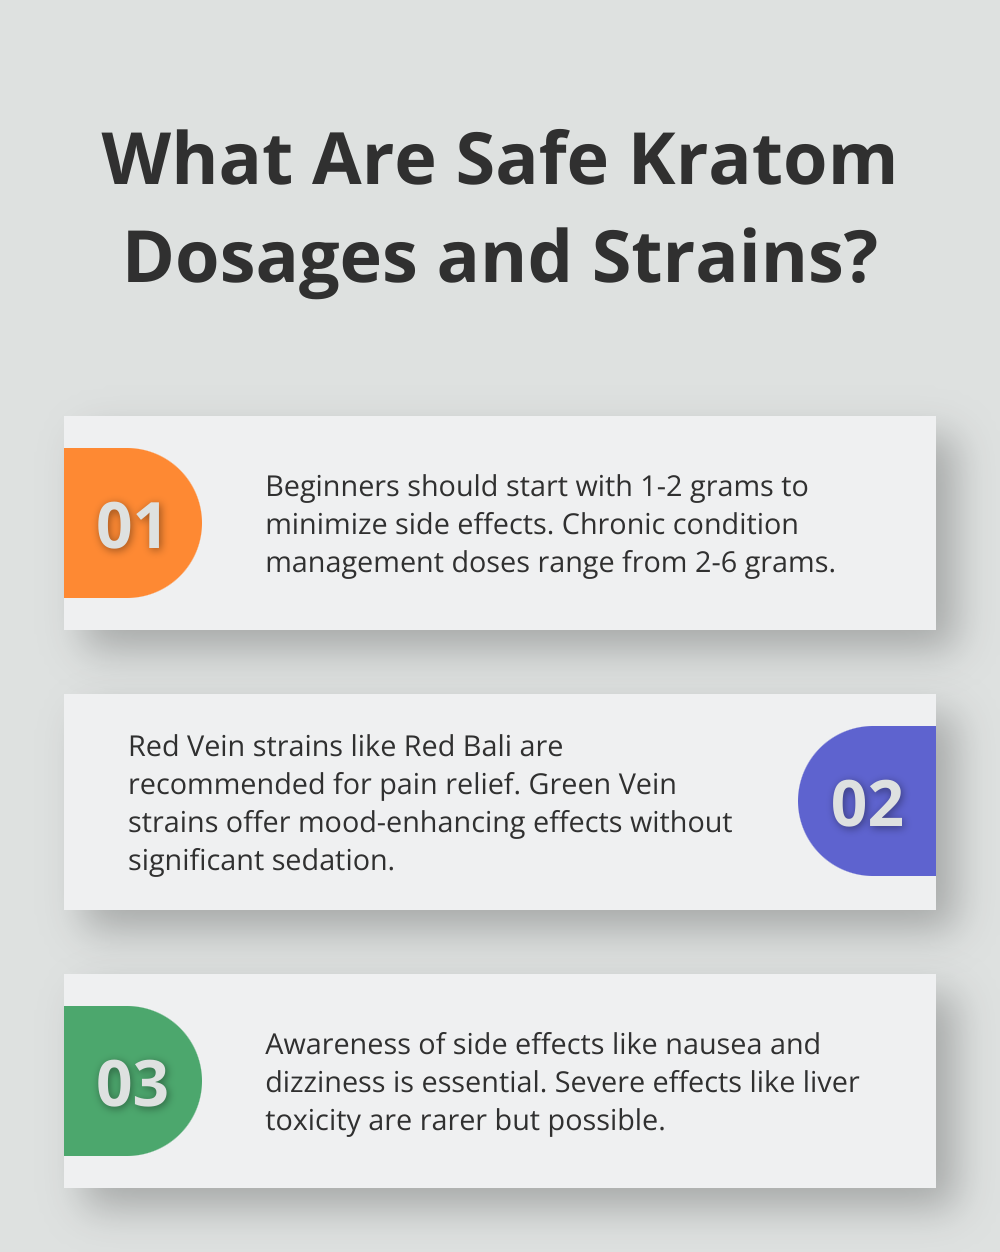 Fact - What Are Safe Kratom Dosages and Strains?